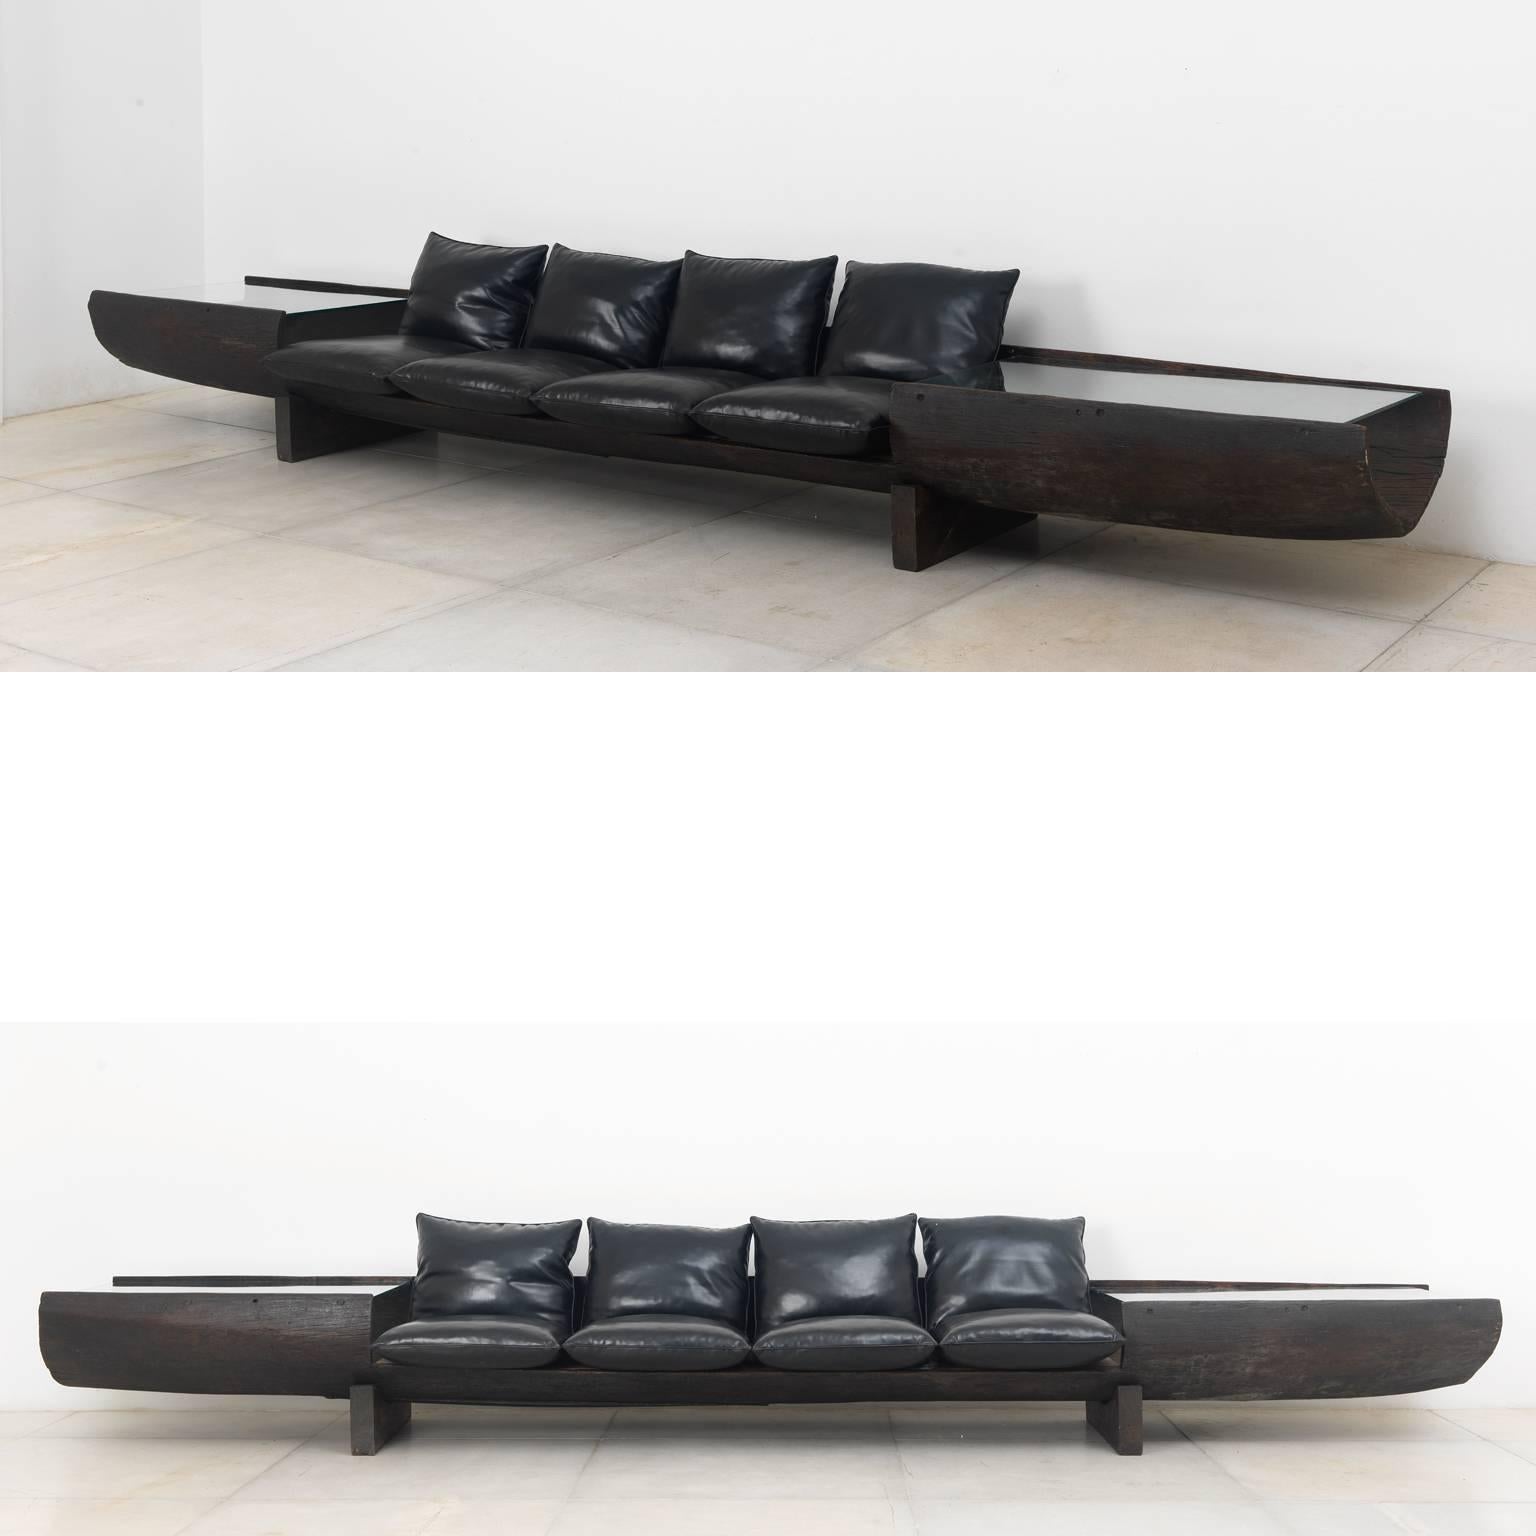 Huge sofa in Brazilian hardwood and black faux leather by Jose Zanine Caldas, 1973
Provenance: from a Zanines' house project in Joatinga neighborhood, Rio de Janeiro.

Zanine is one of the few designers who produced furniture in several schools